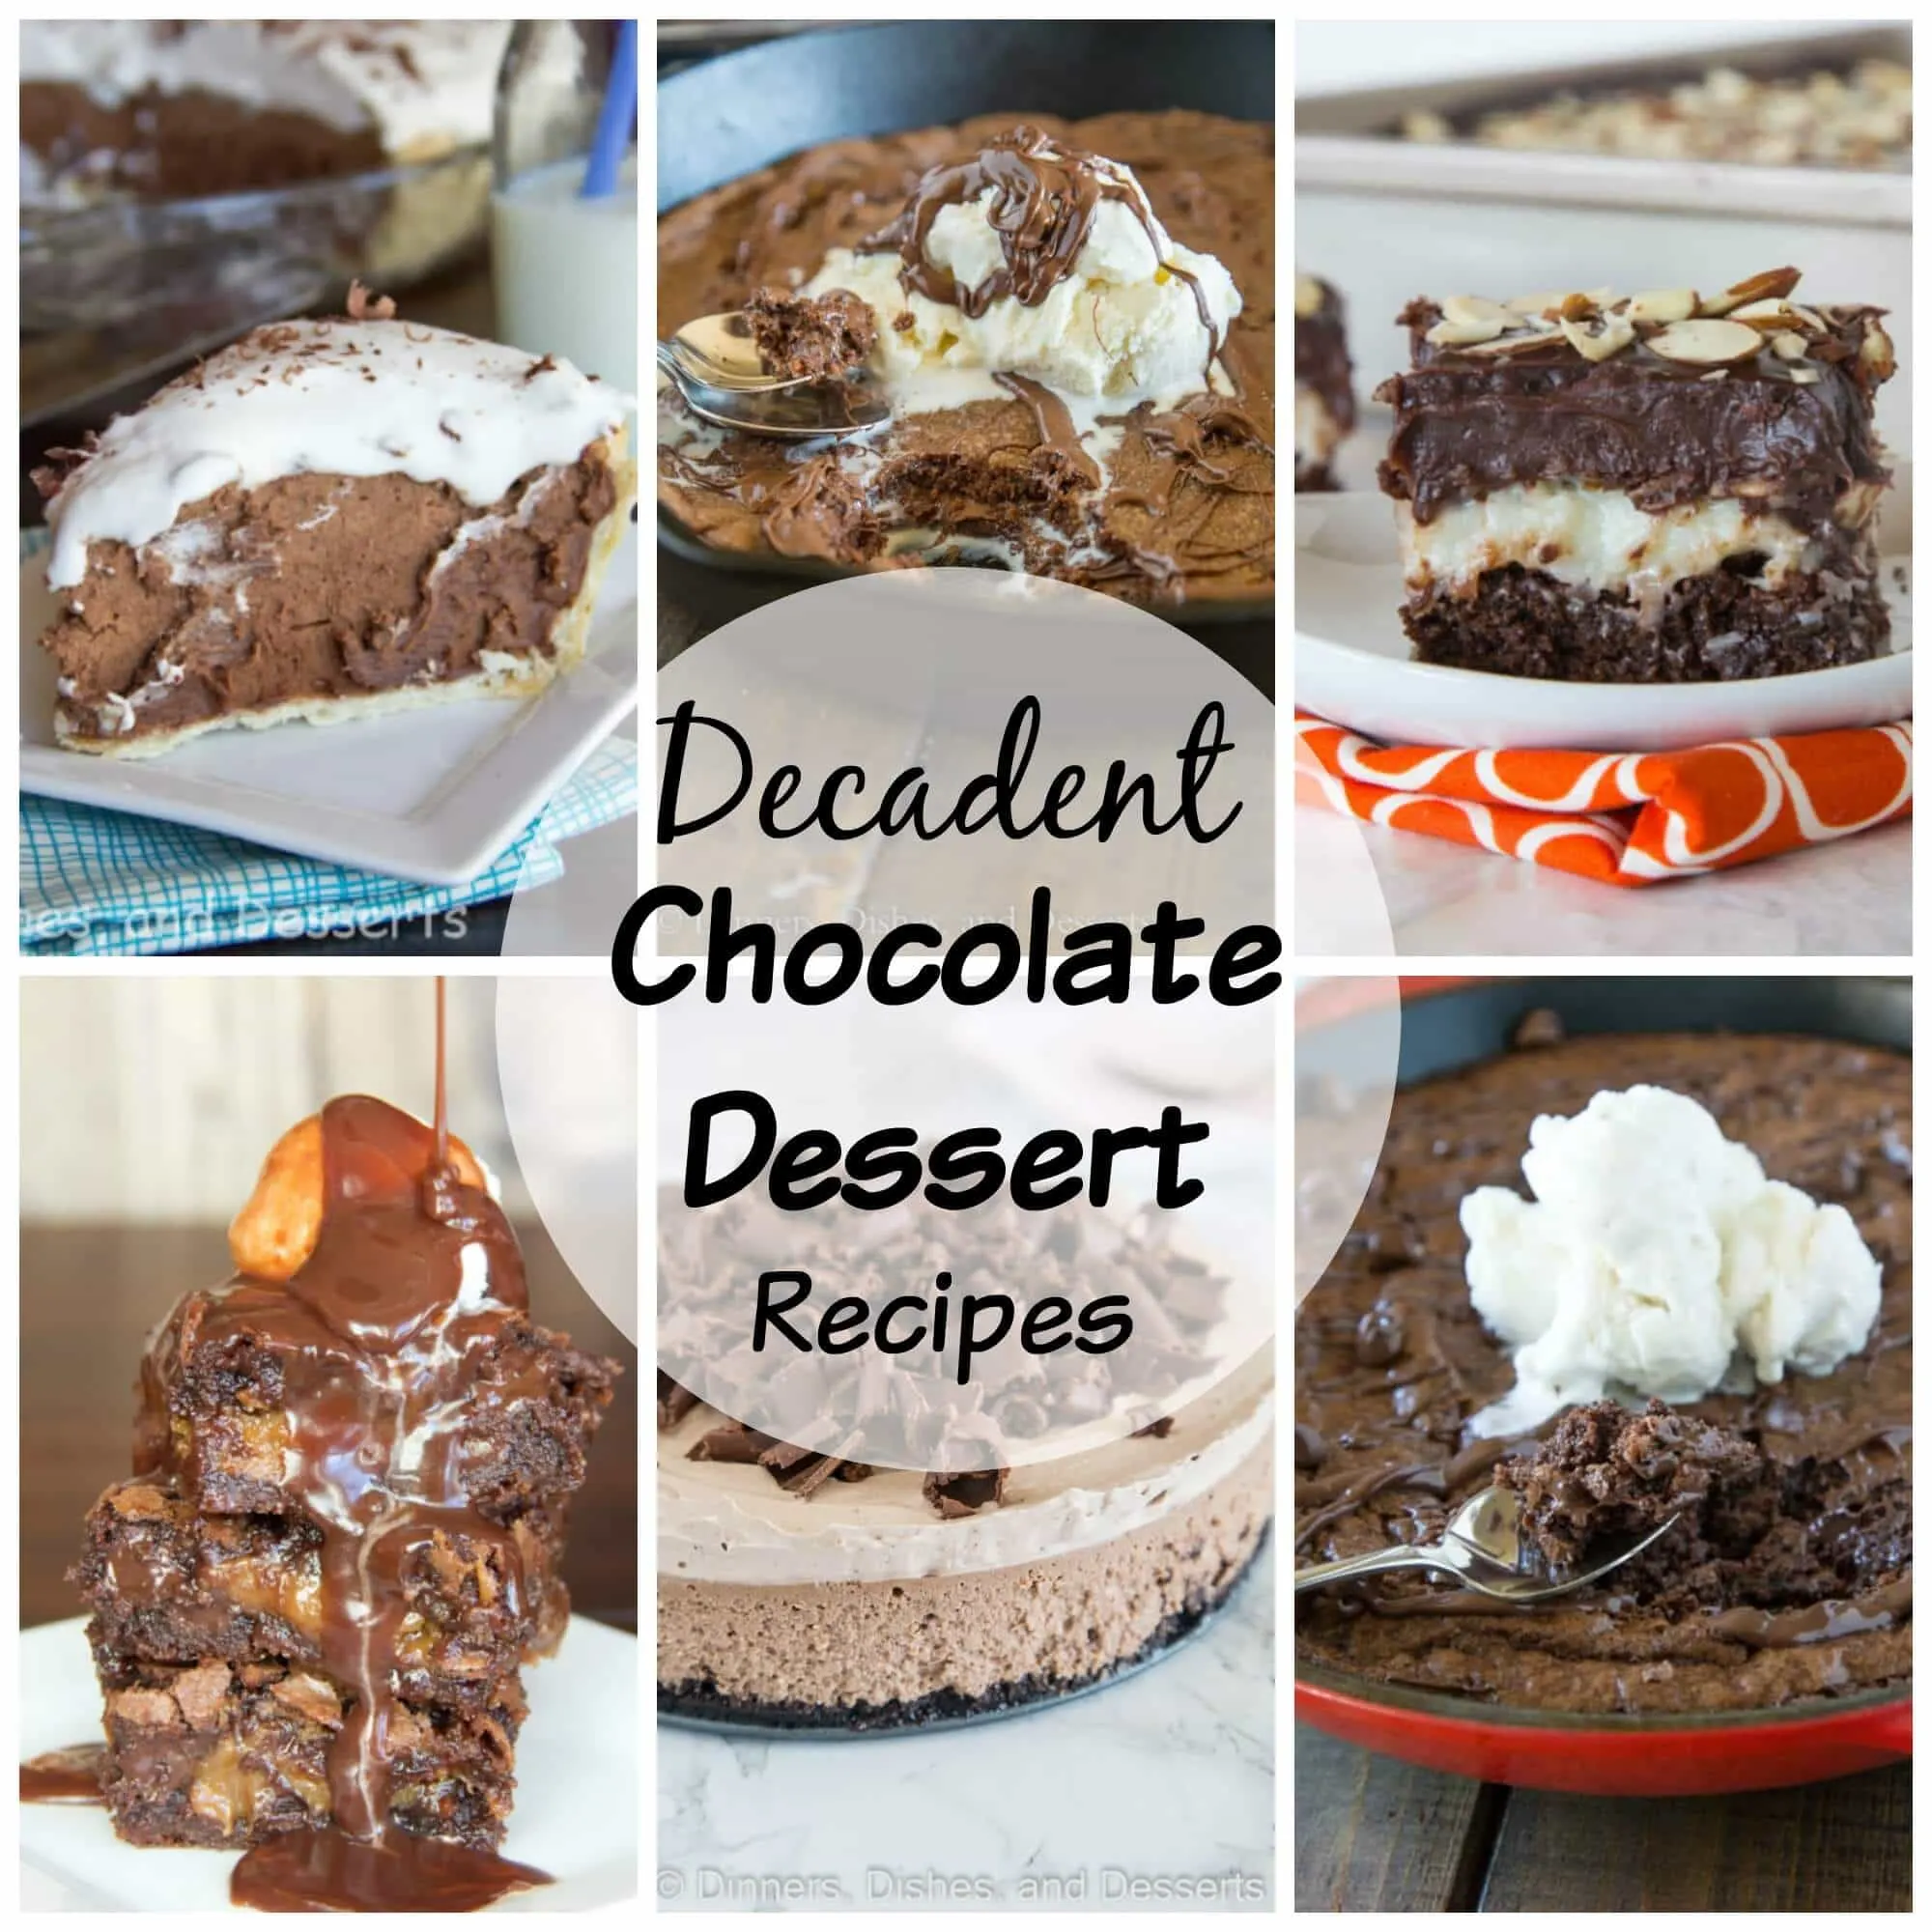 Decadent Chocolate Dessert Recipes - 17 chocolate recipes that are perfect for your Valentine's Day or any chocolate craving that may strike.